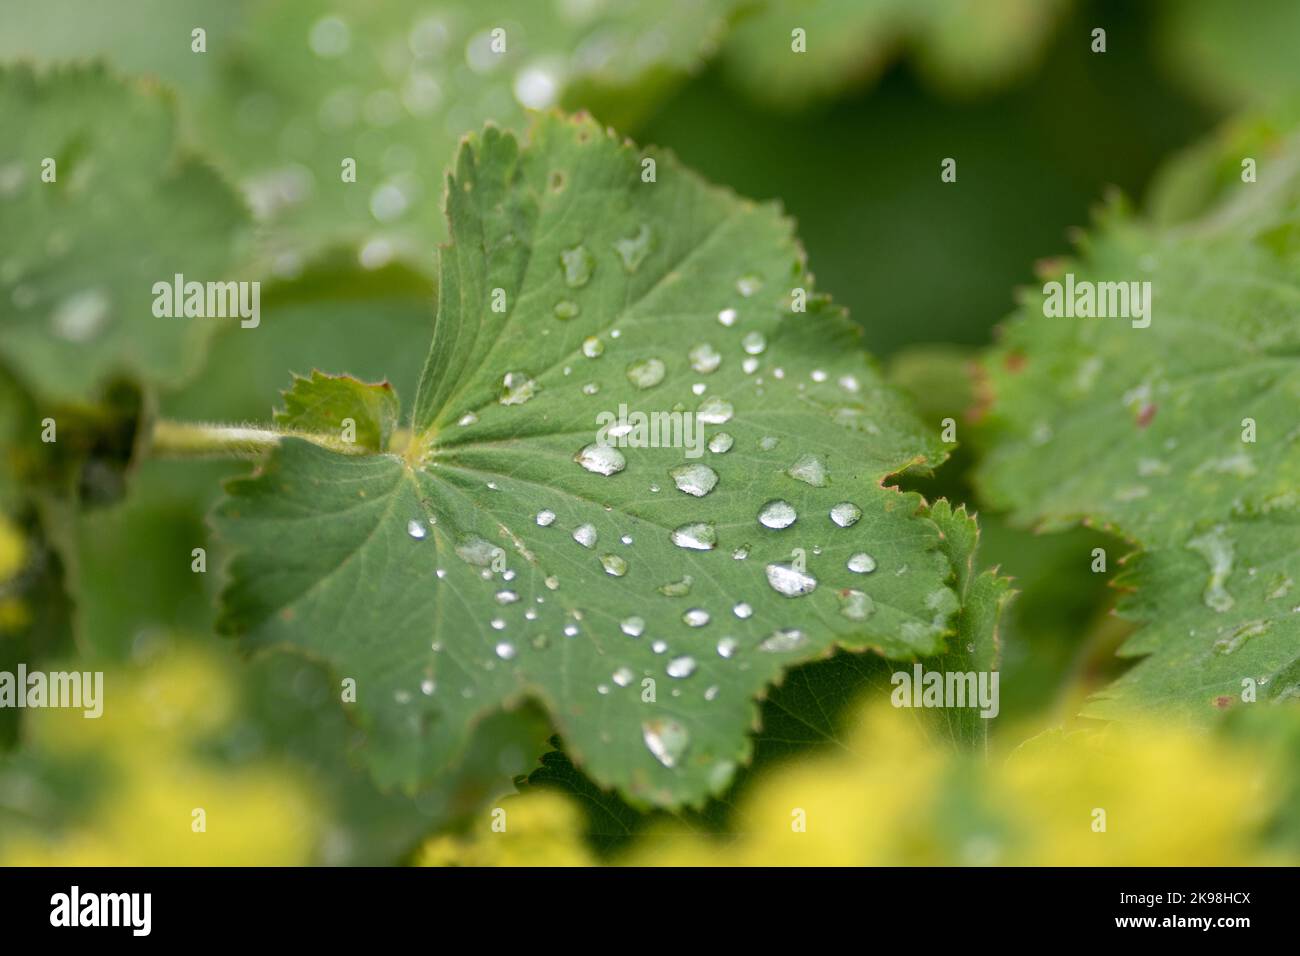 A single closeup of a lady's mantle leaf with multiple water droplets scattered on the lush plant. There are yellow tiny flowers in the background. Stock Photo